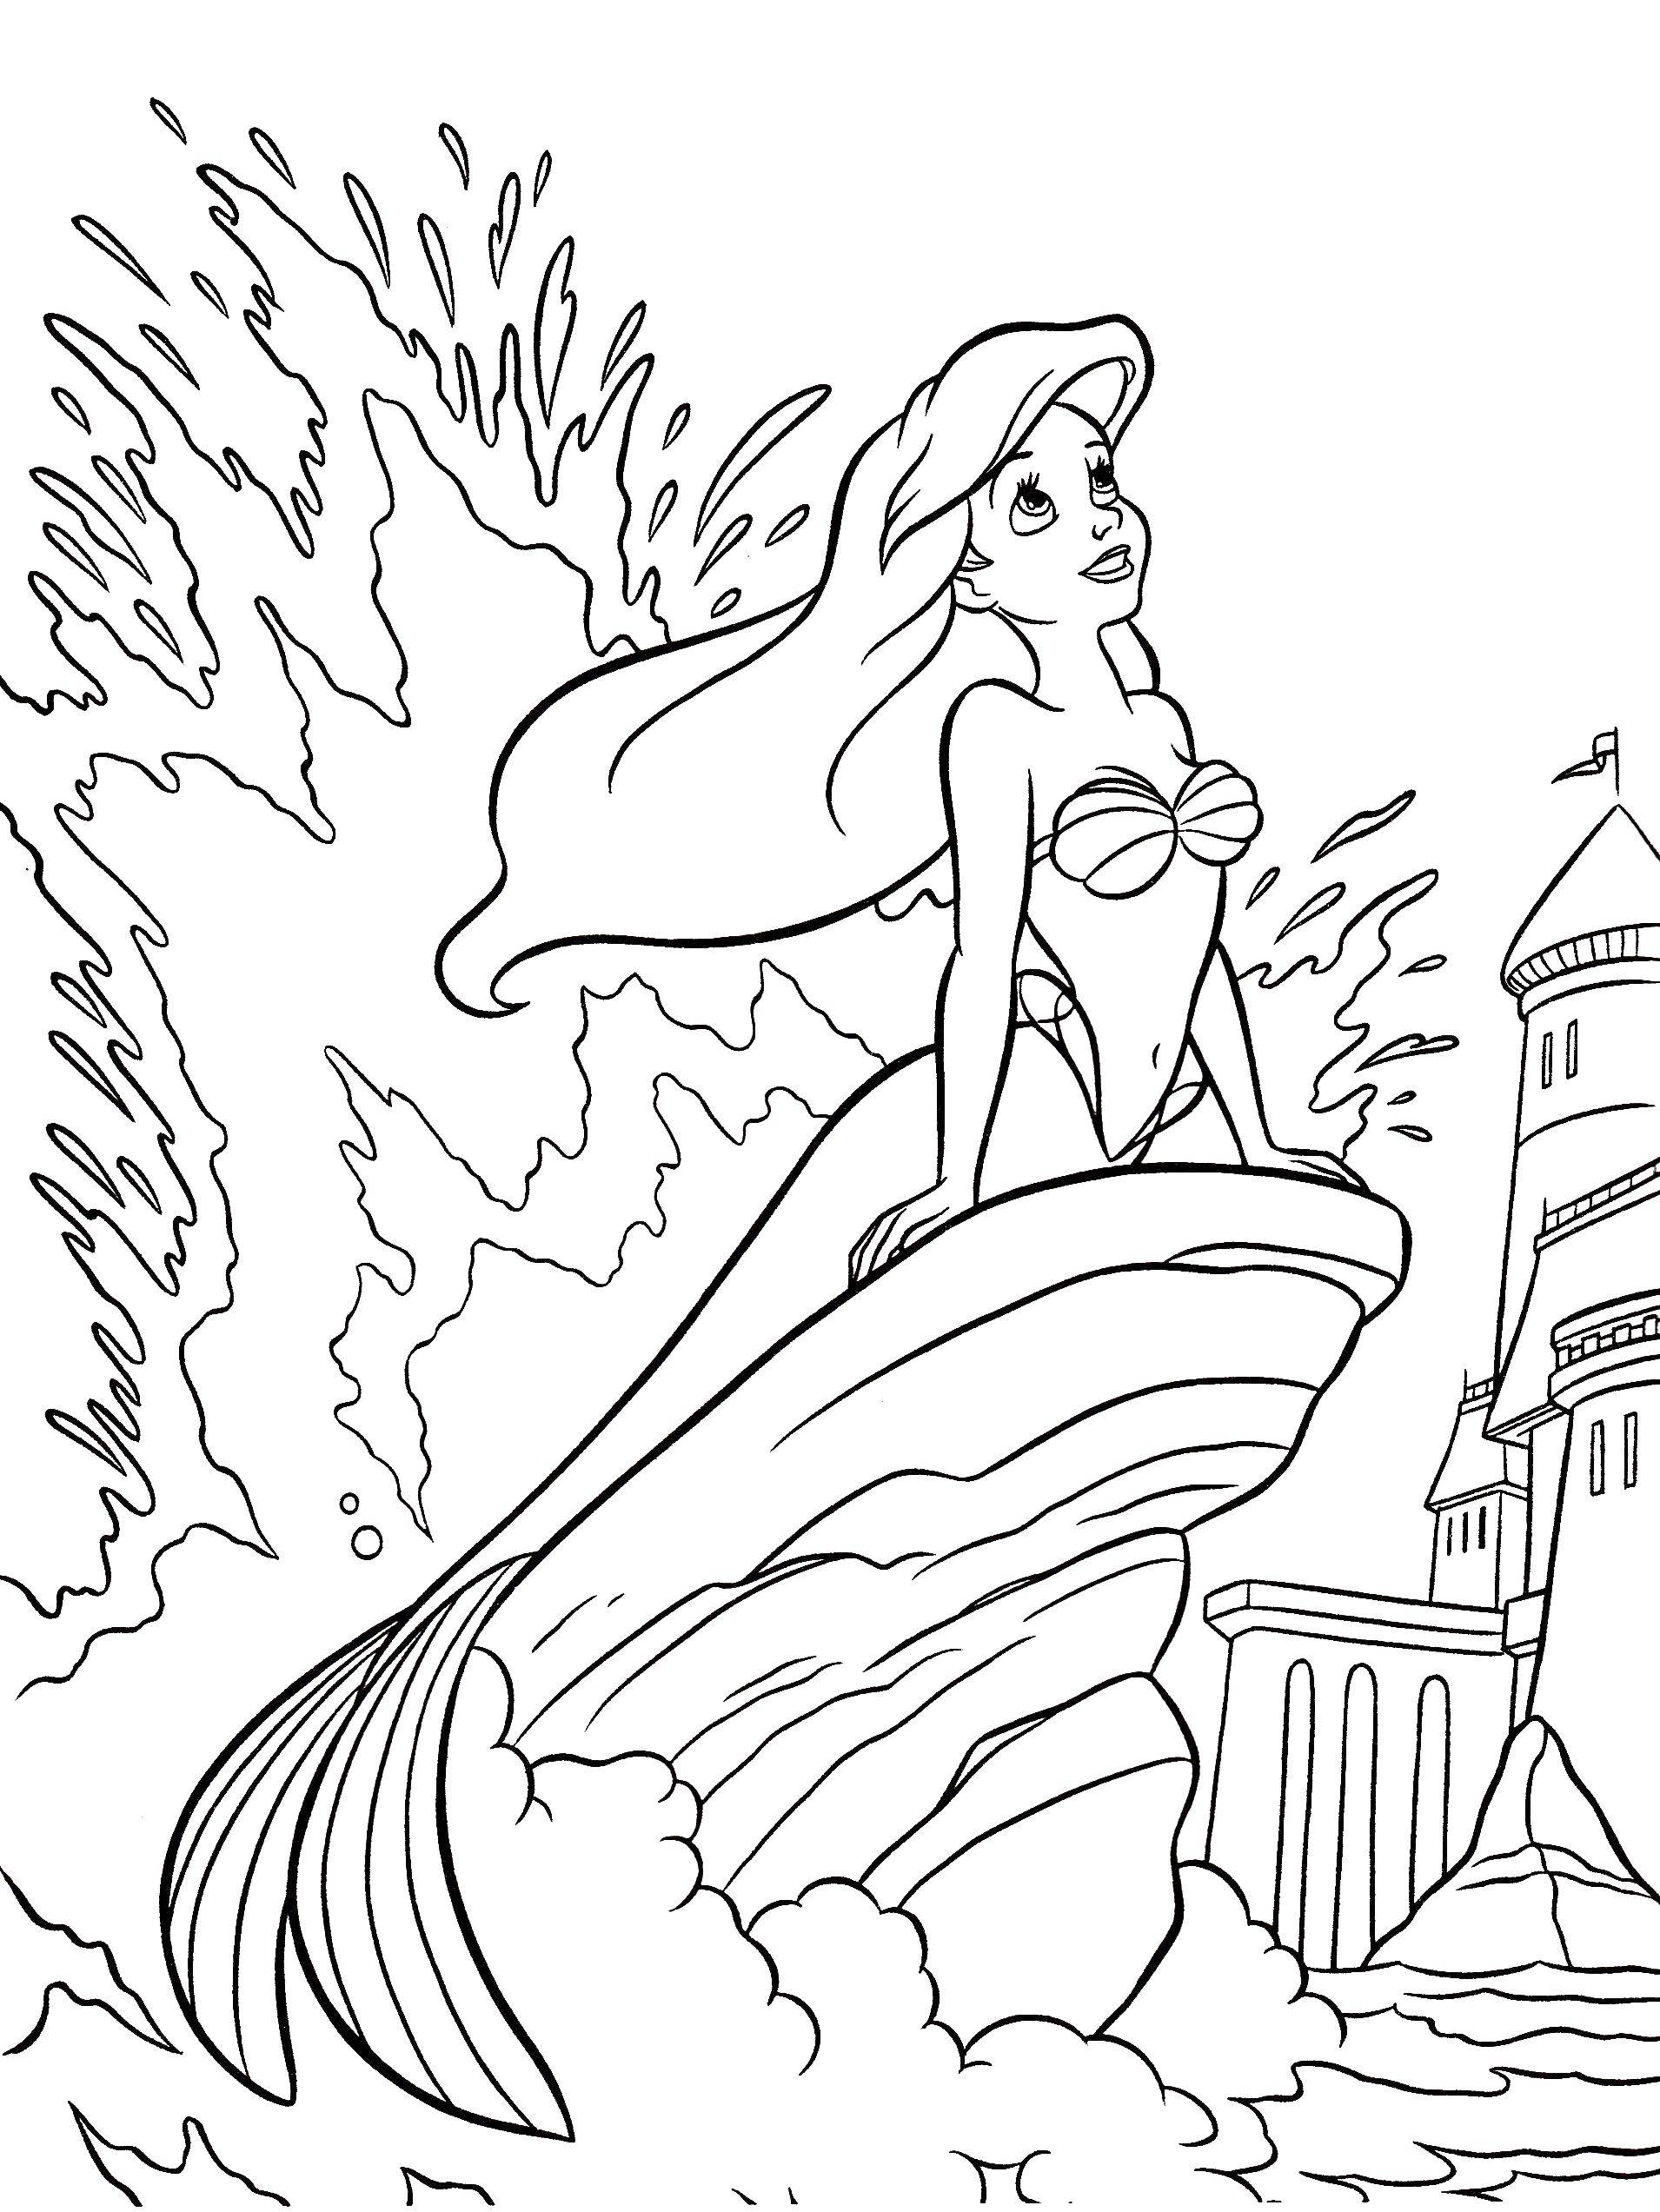 Coloring Ariel on the crest of a wave. Category The little mermaid. Tags:  the little mermaid, Ariel, wave.